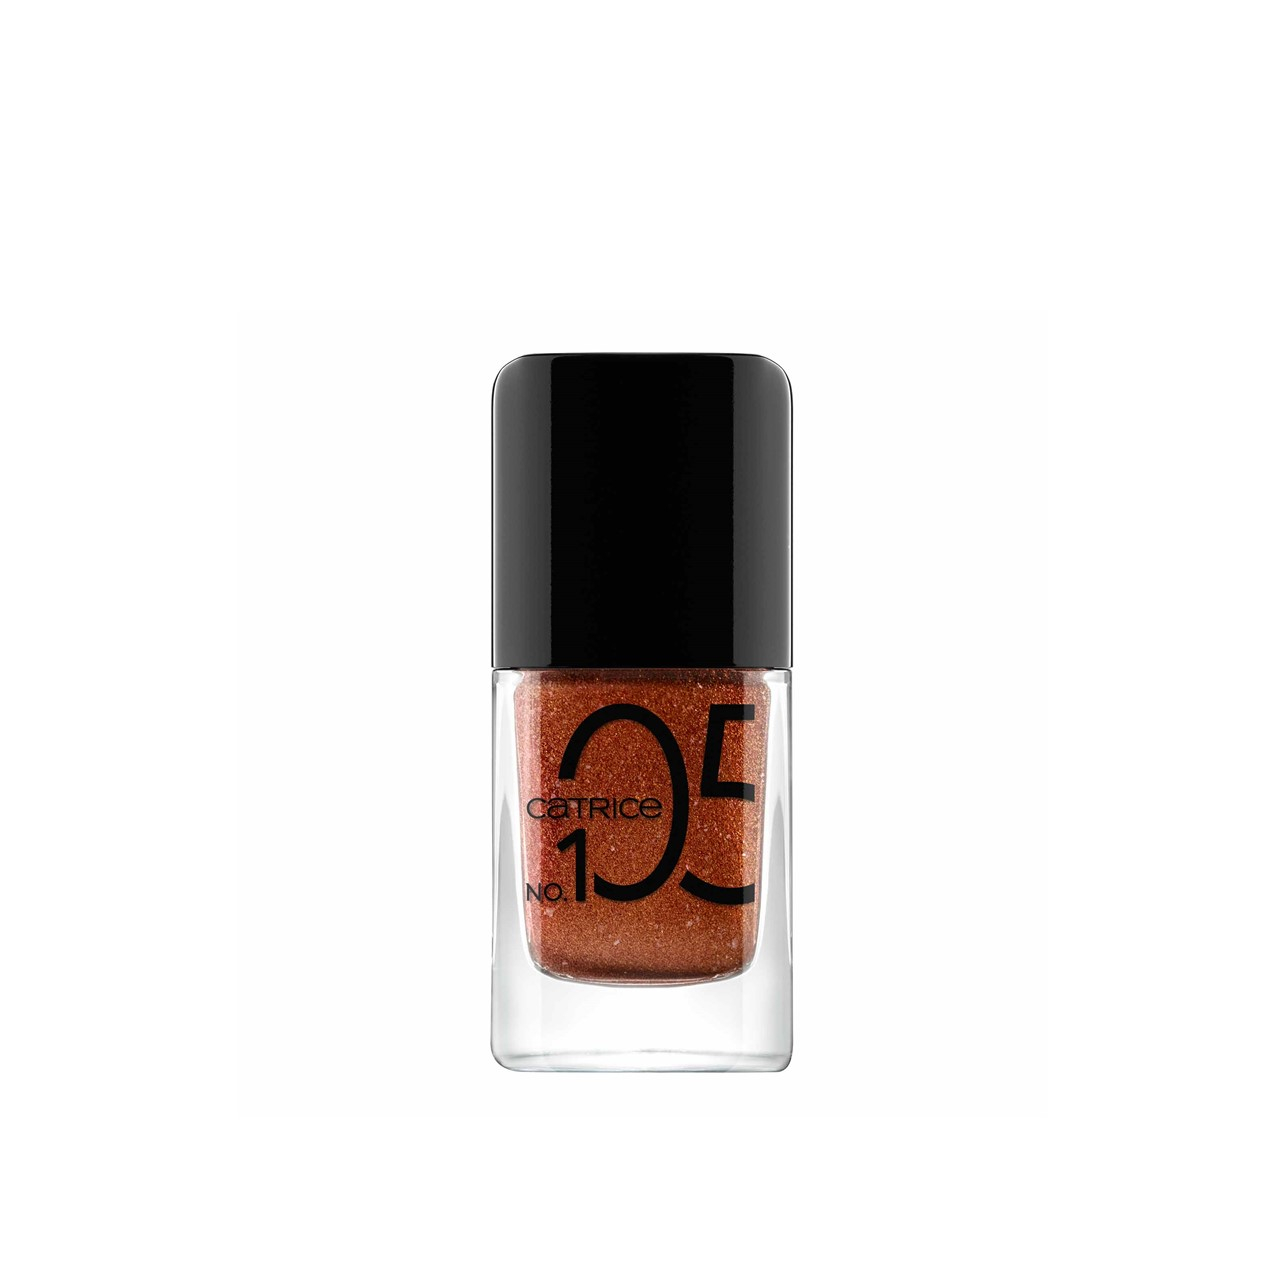 Catrice ICONails Gel Lacquer 105 Rusty Rust 10.5ml (0.36fl oz)